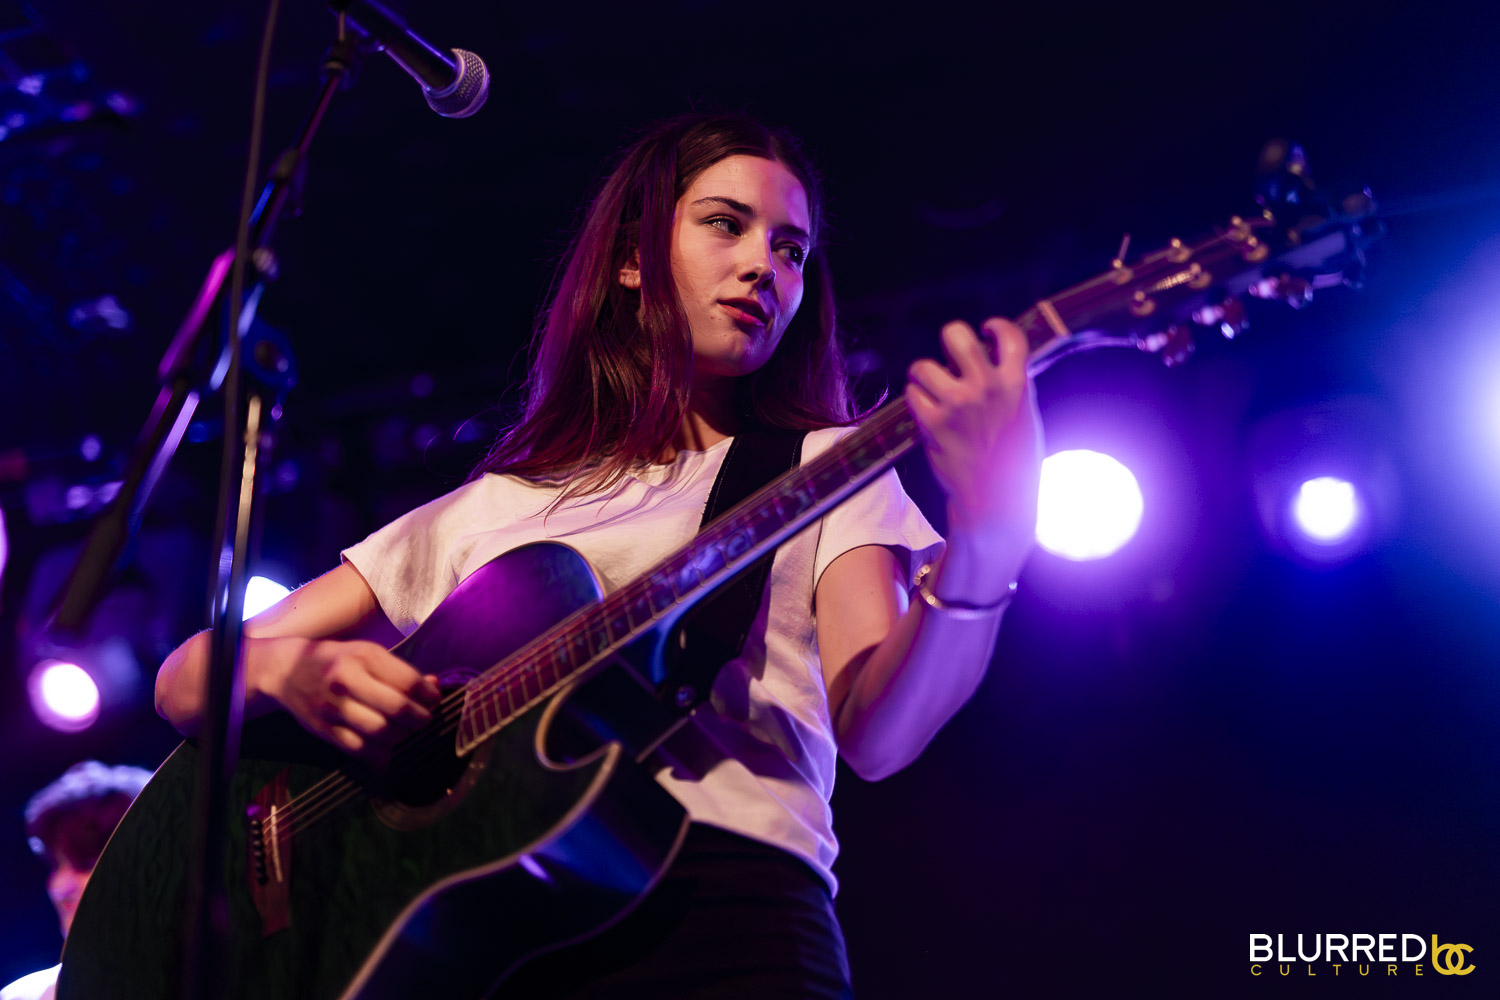 23.10.14.Moroccan Lounge.isabel Dumaa 298 Enhanced Nr Isabel Dumaa On Music, Inspiration, And Her Upcoming Ep